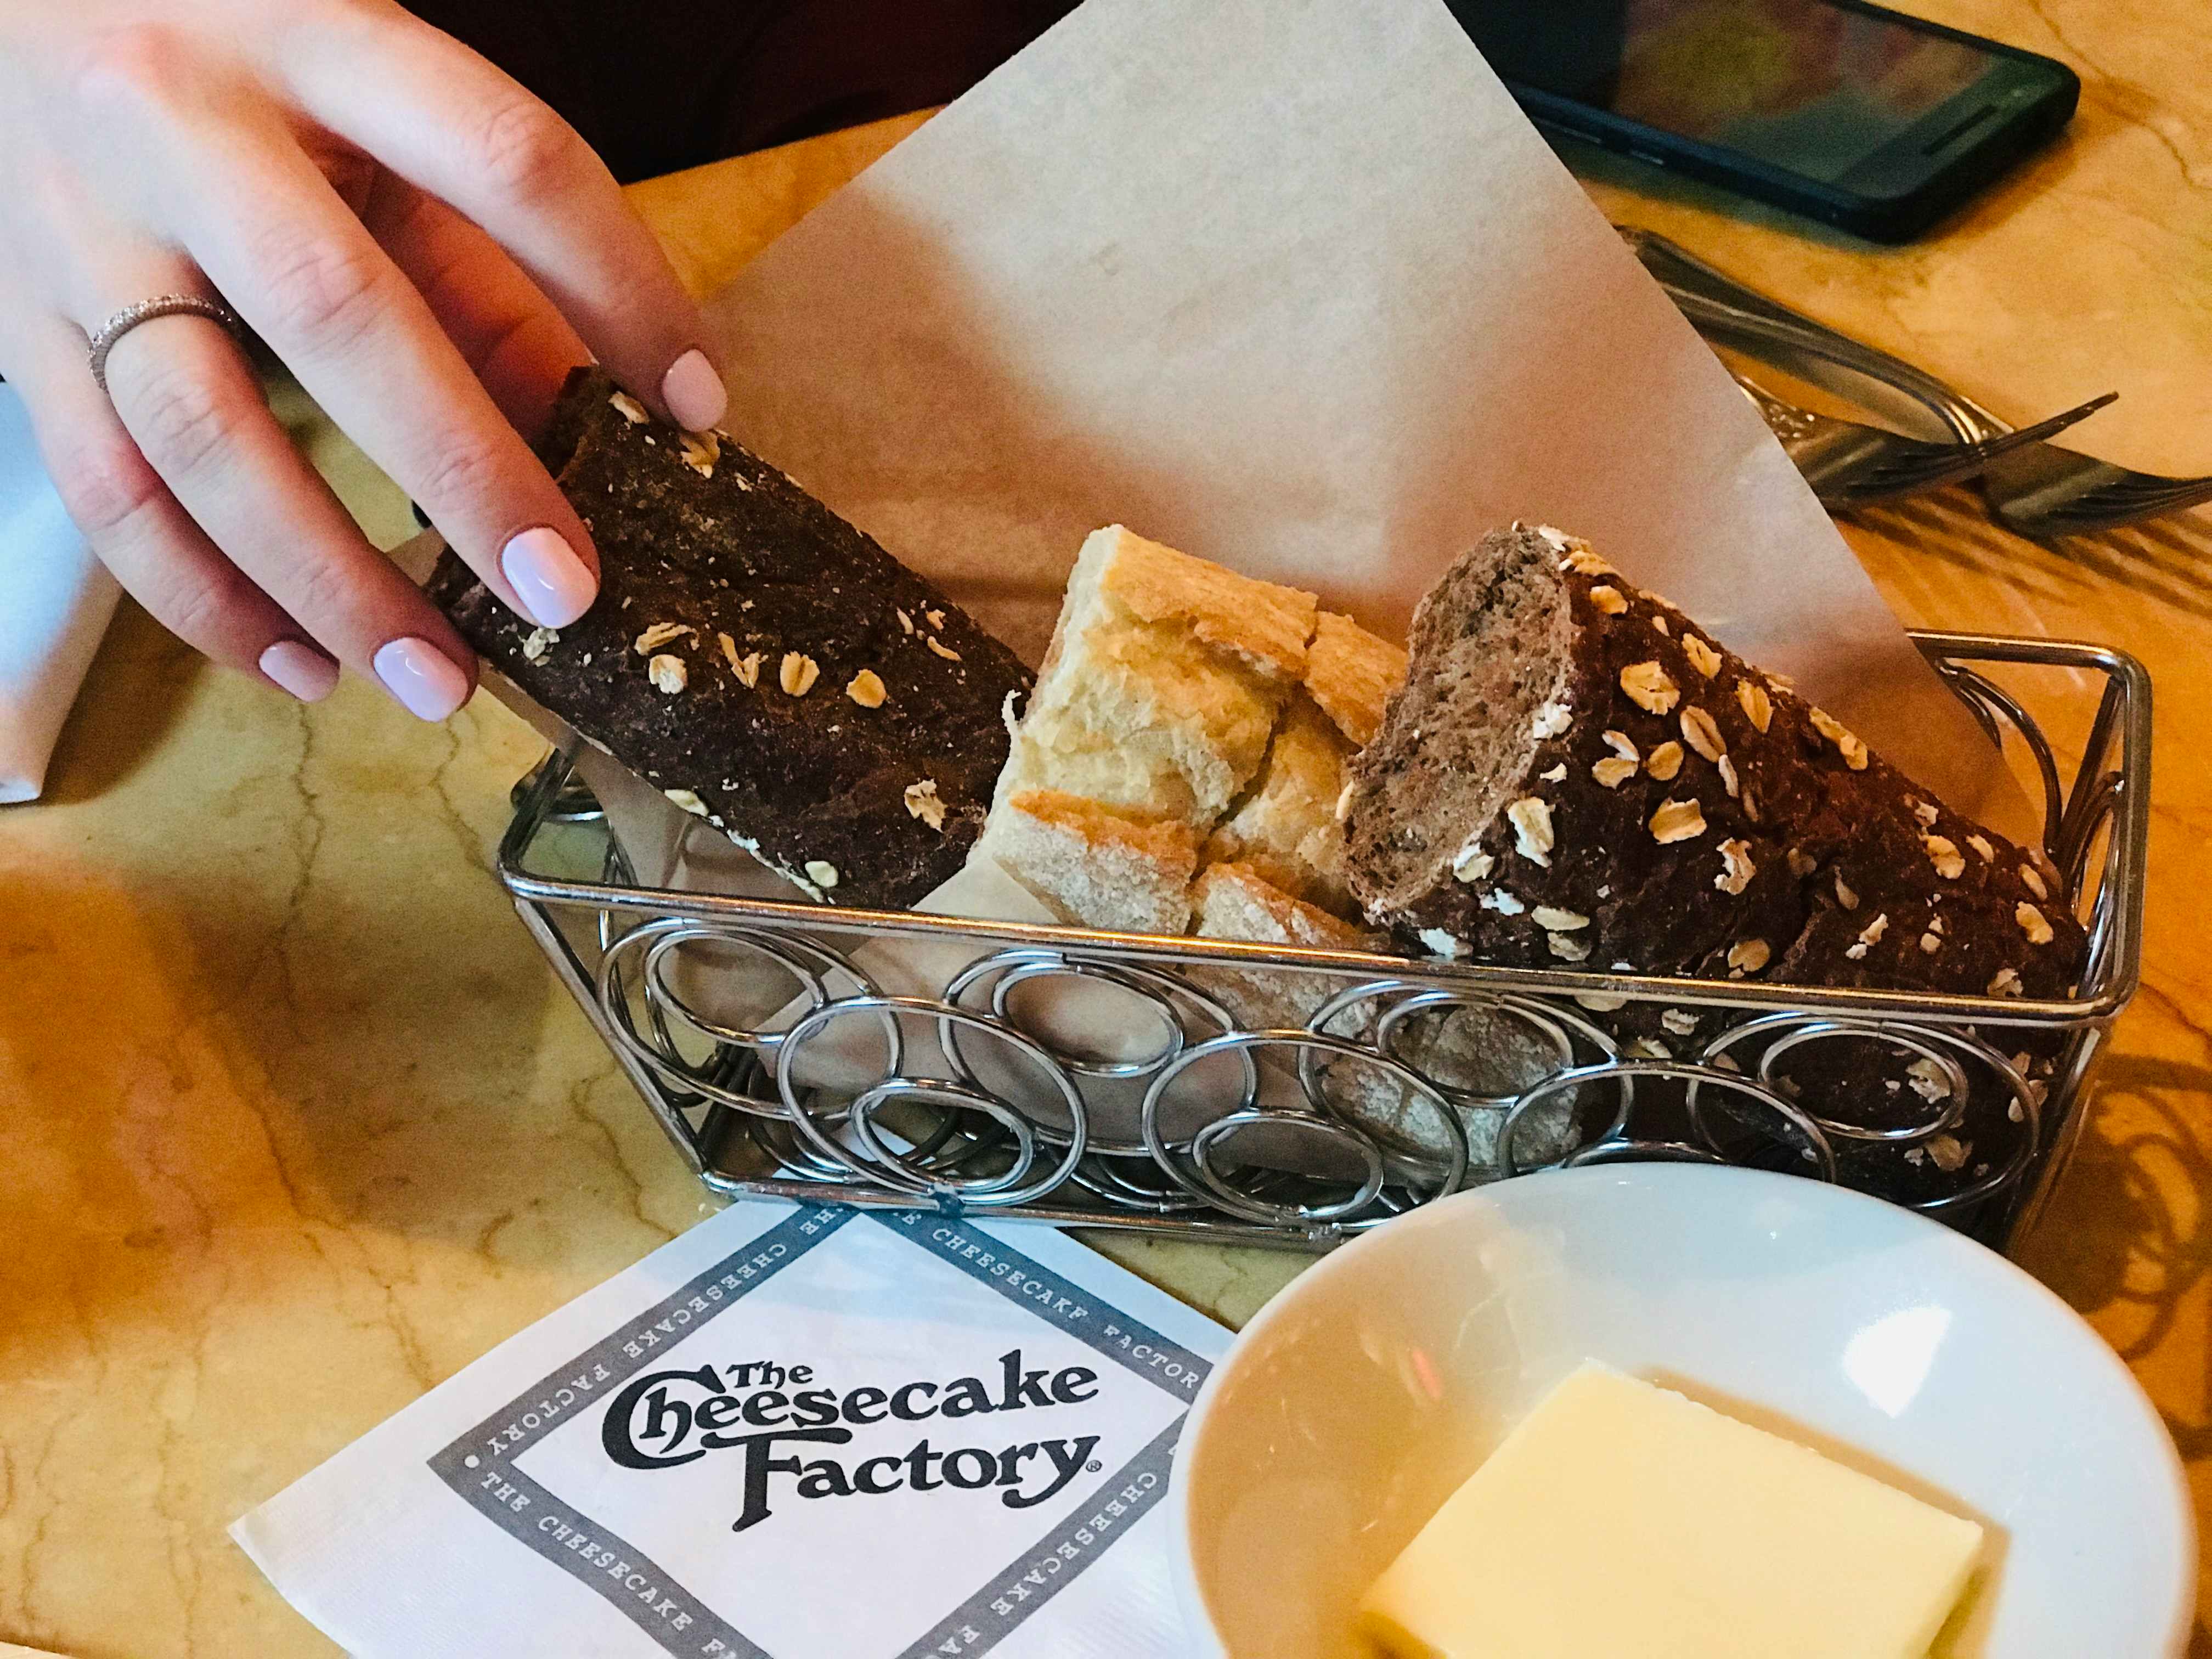 A person's hand reaching to take a piece of bread from a basket in the middle of a table inside The Cheesecake Factory.